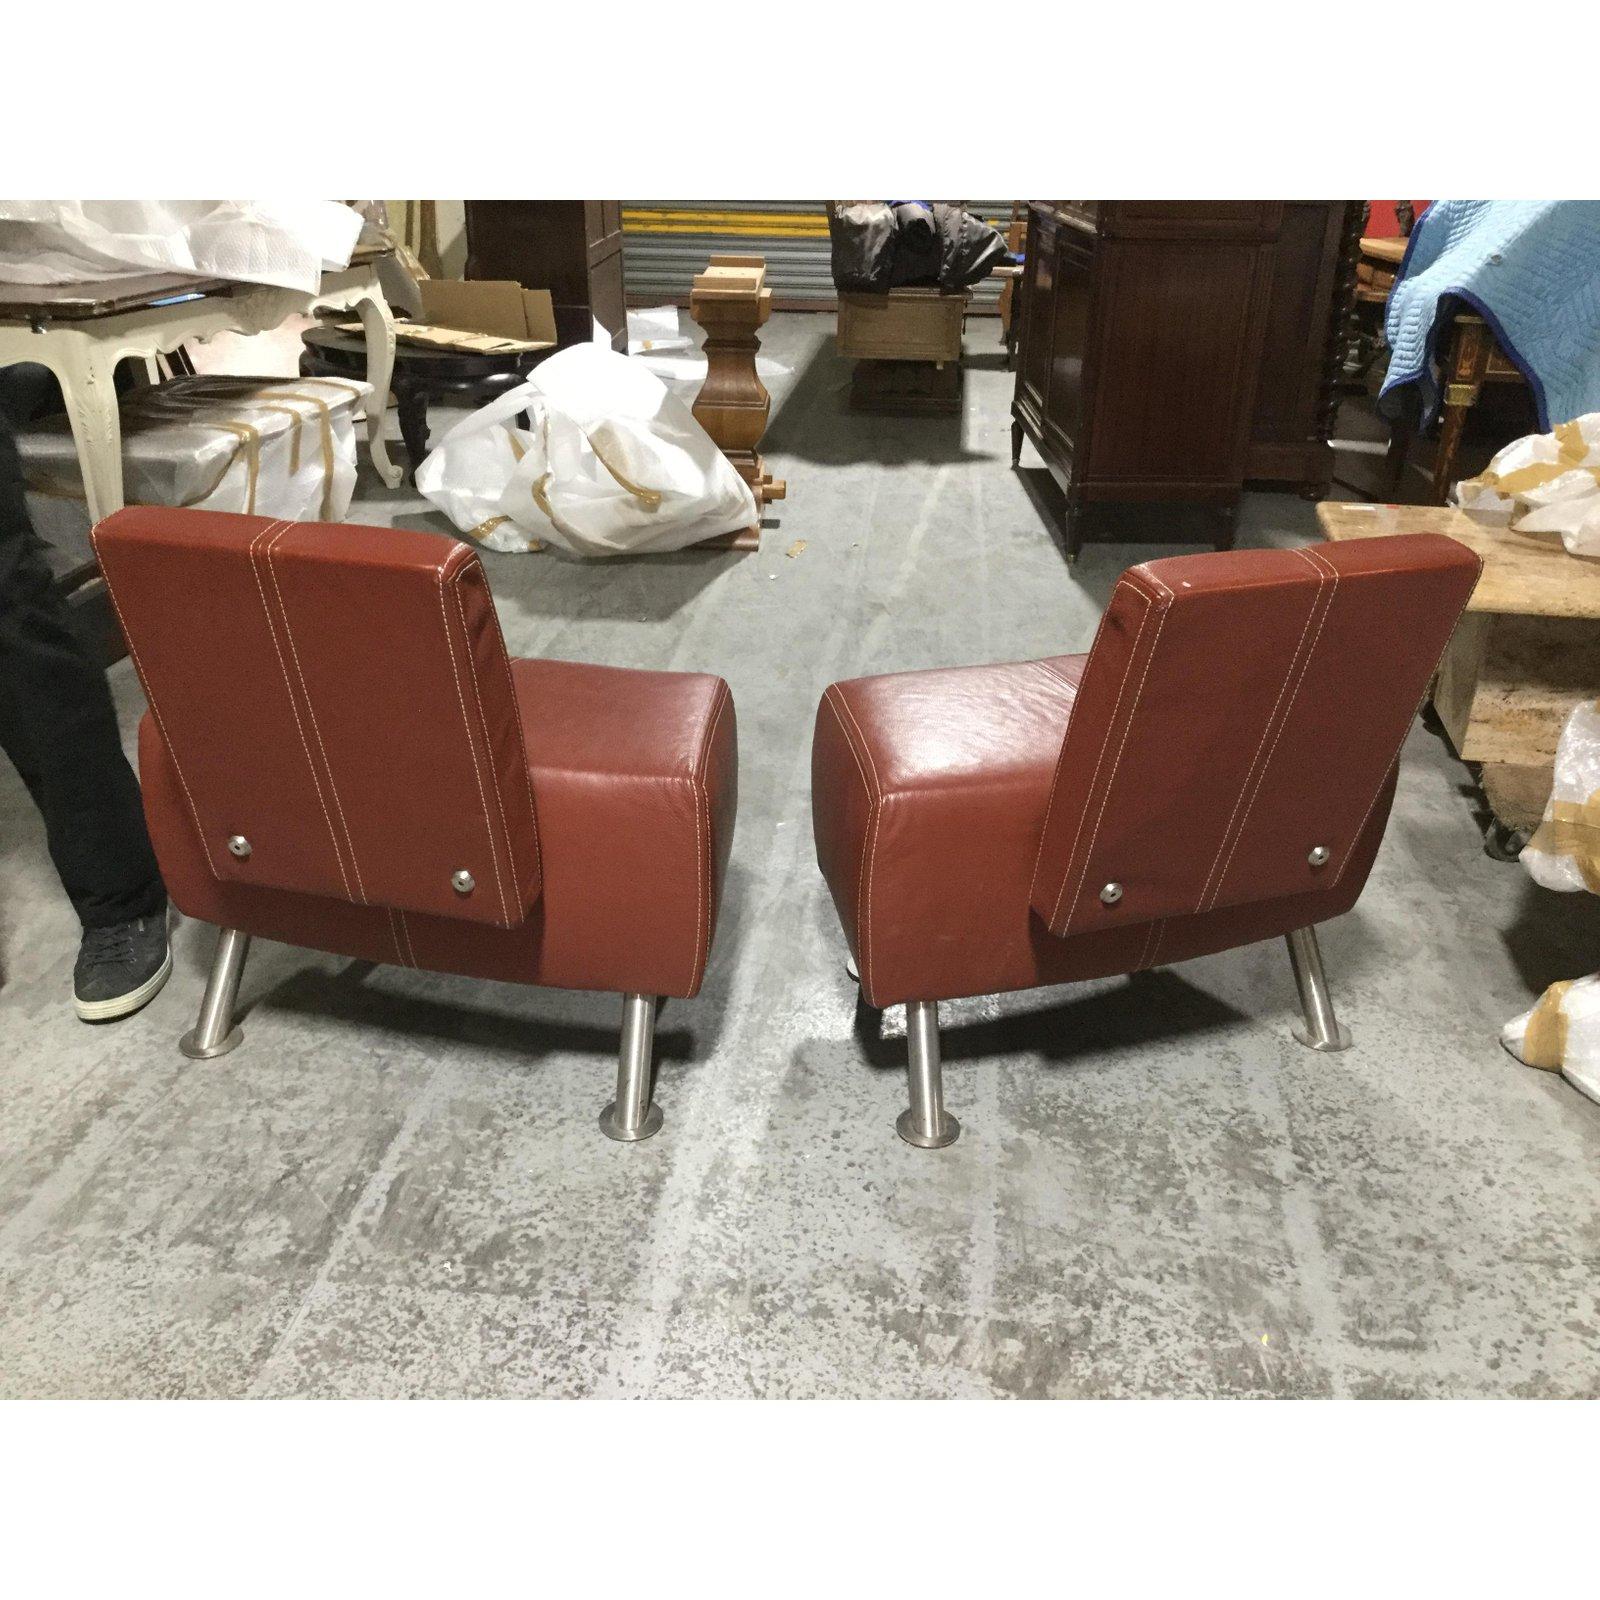 Late 20th Century Chic Italian Industrial Leather Salon Set with Two Chairs and Loveseat